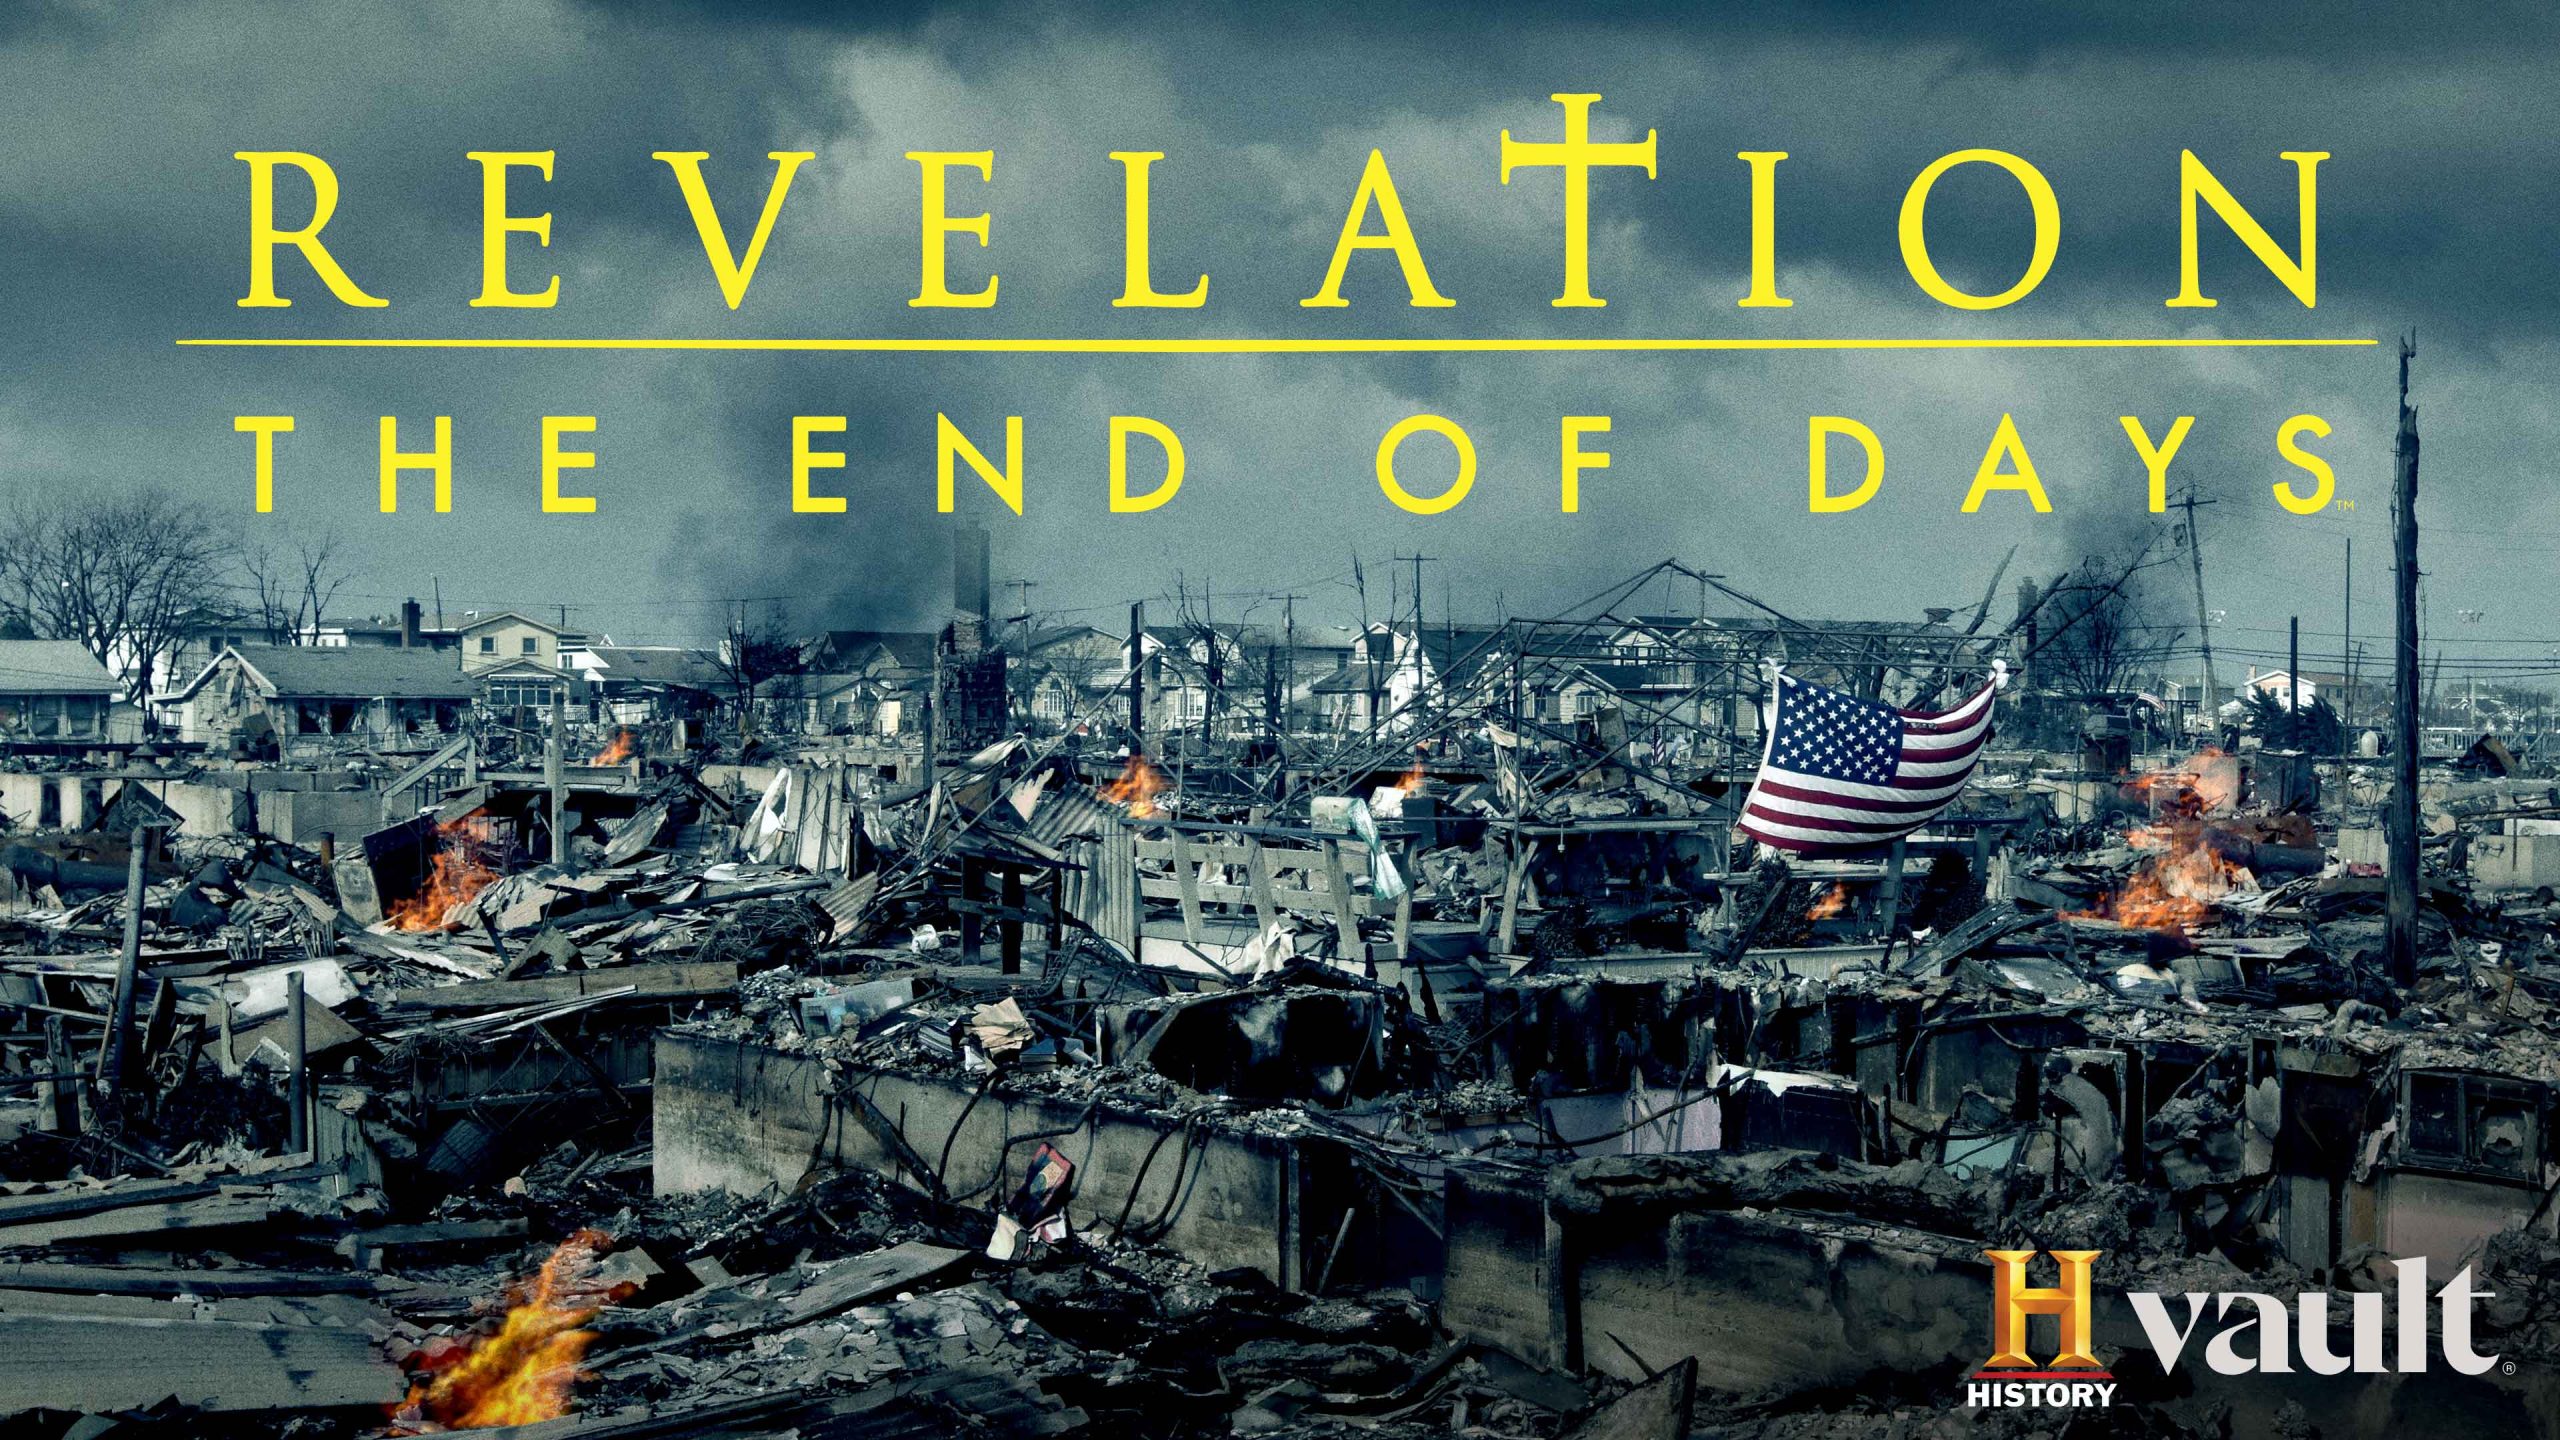 Watch Revelation: The End of Days on HISTORY Vault